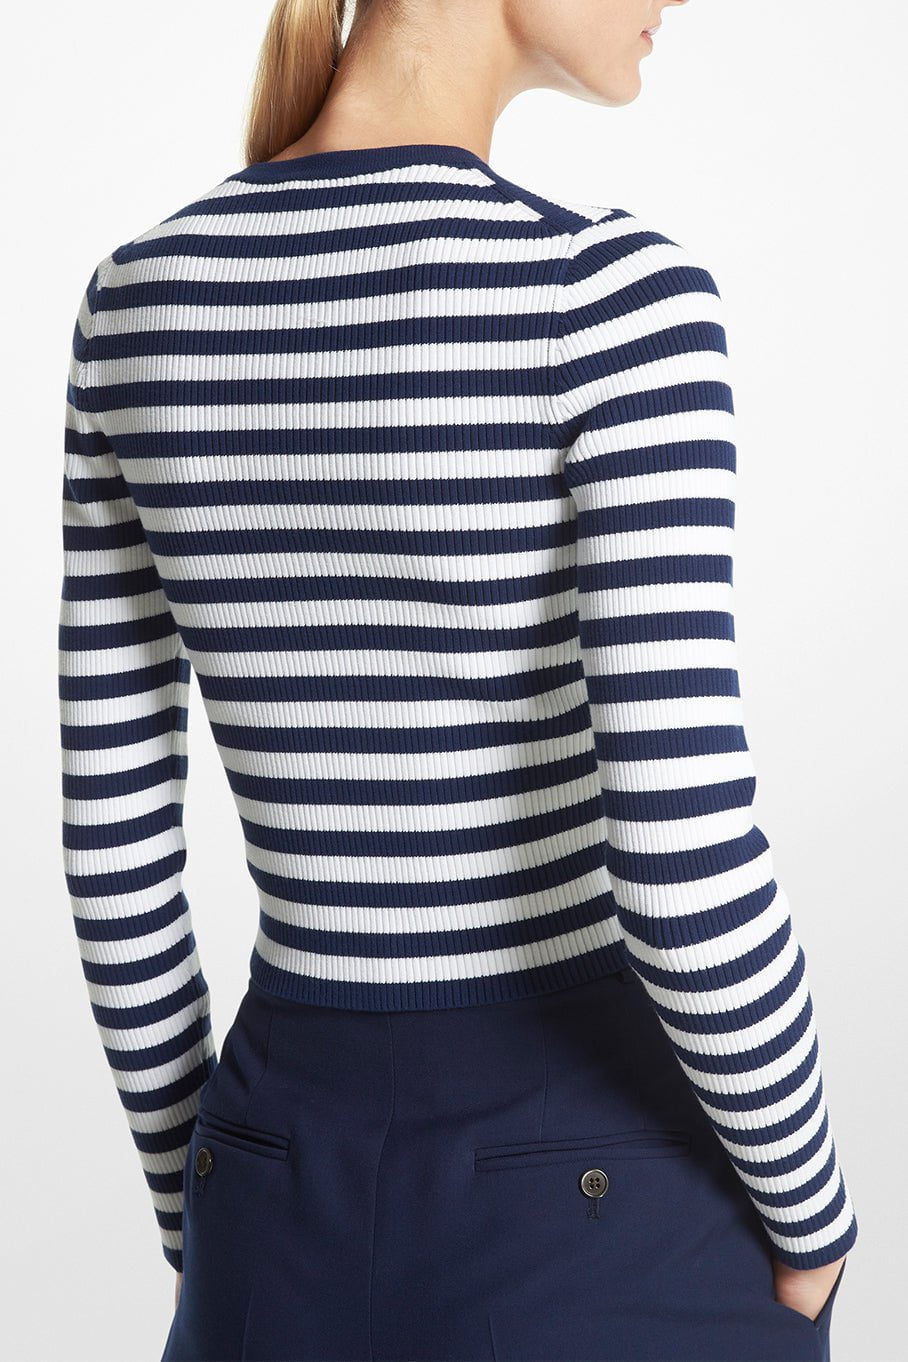 MICHAEL KORS-Long Sleeve Cropped Pullover-